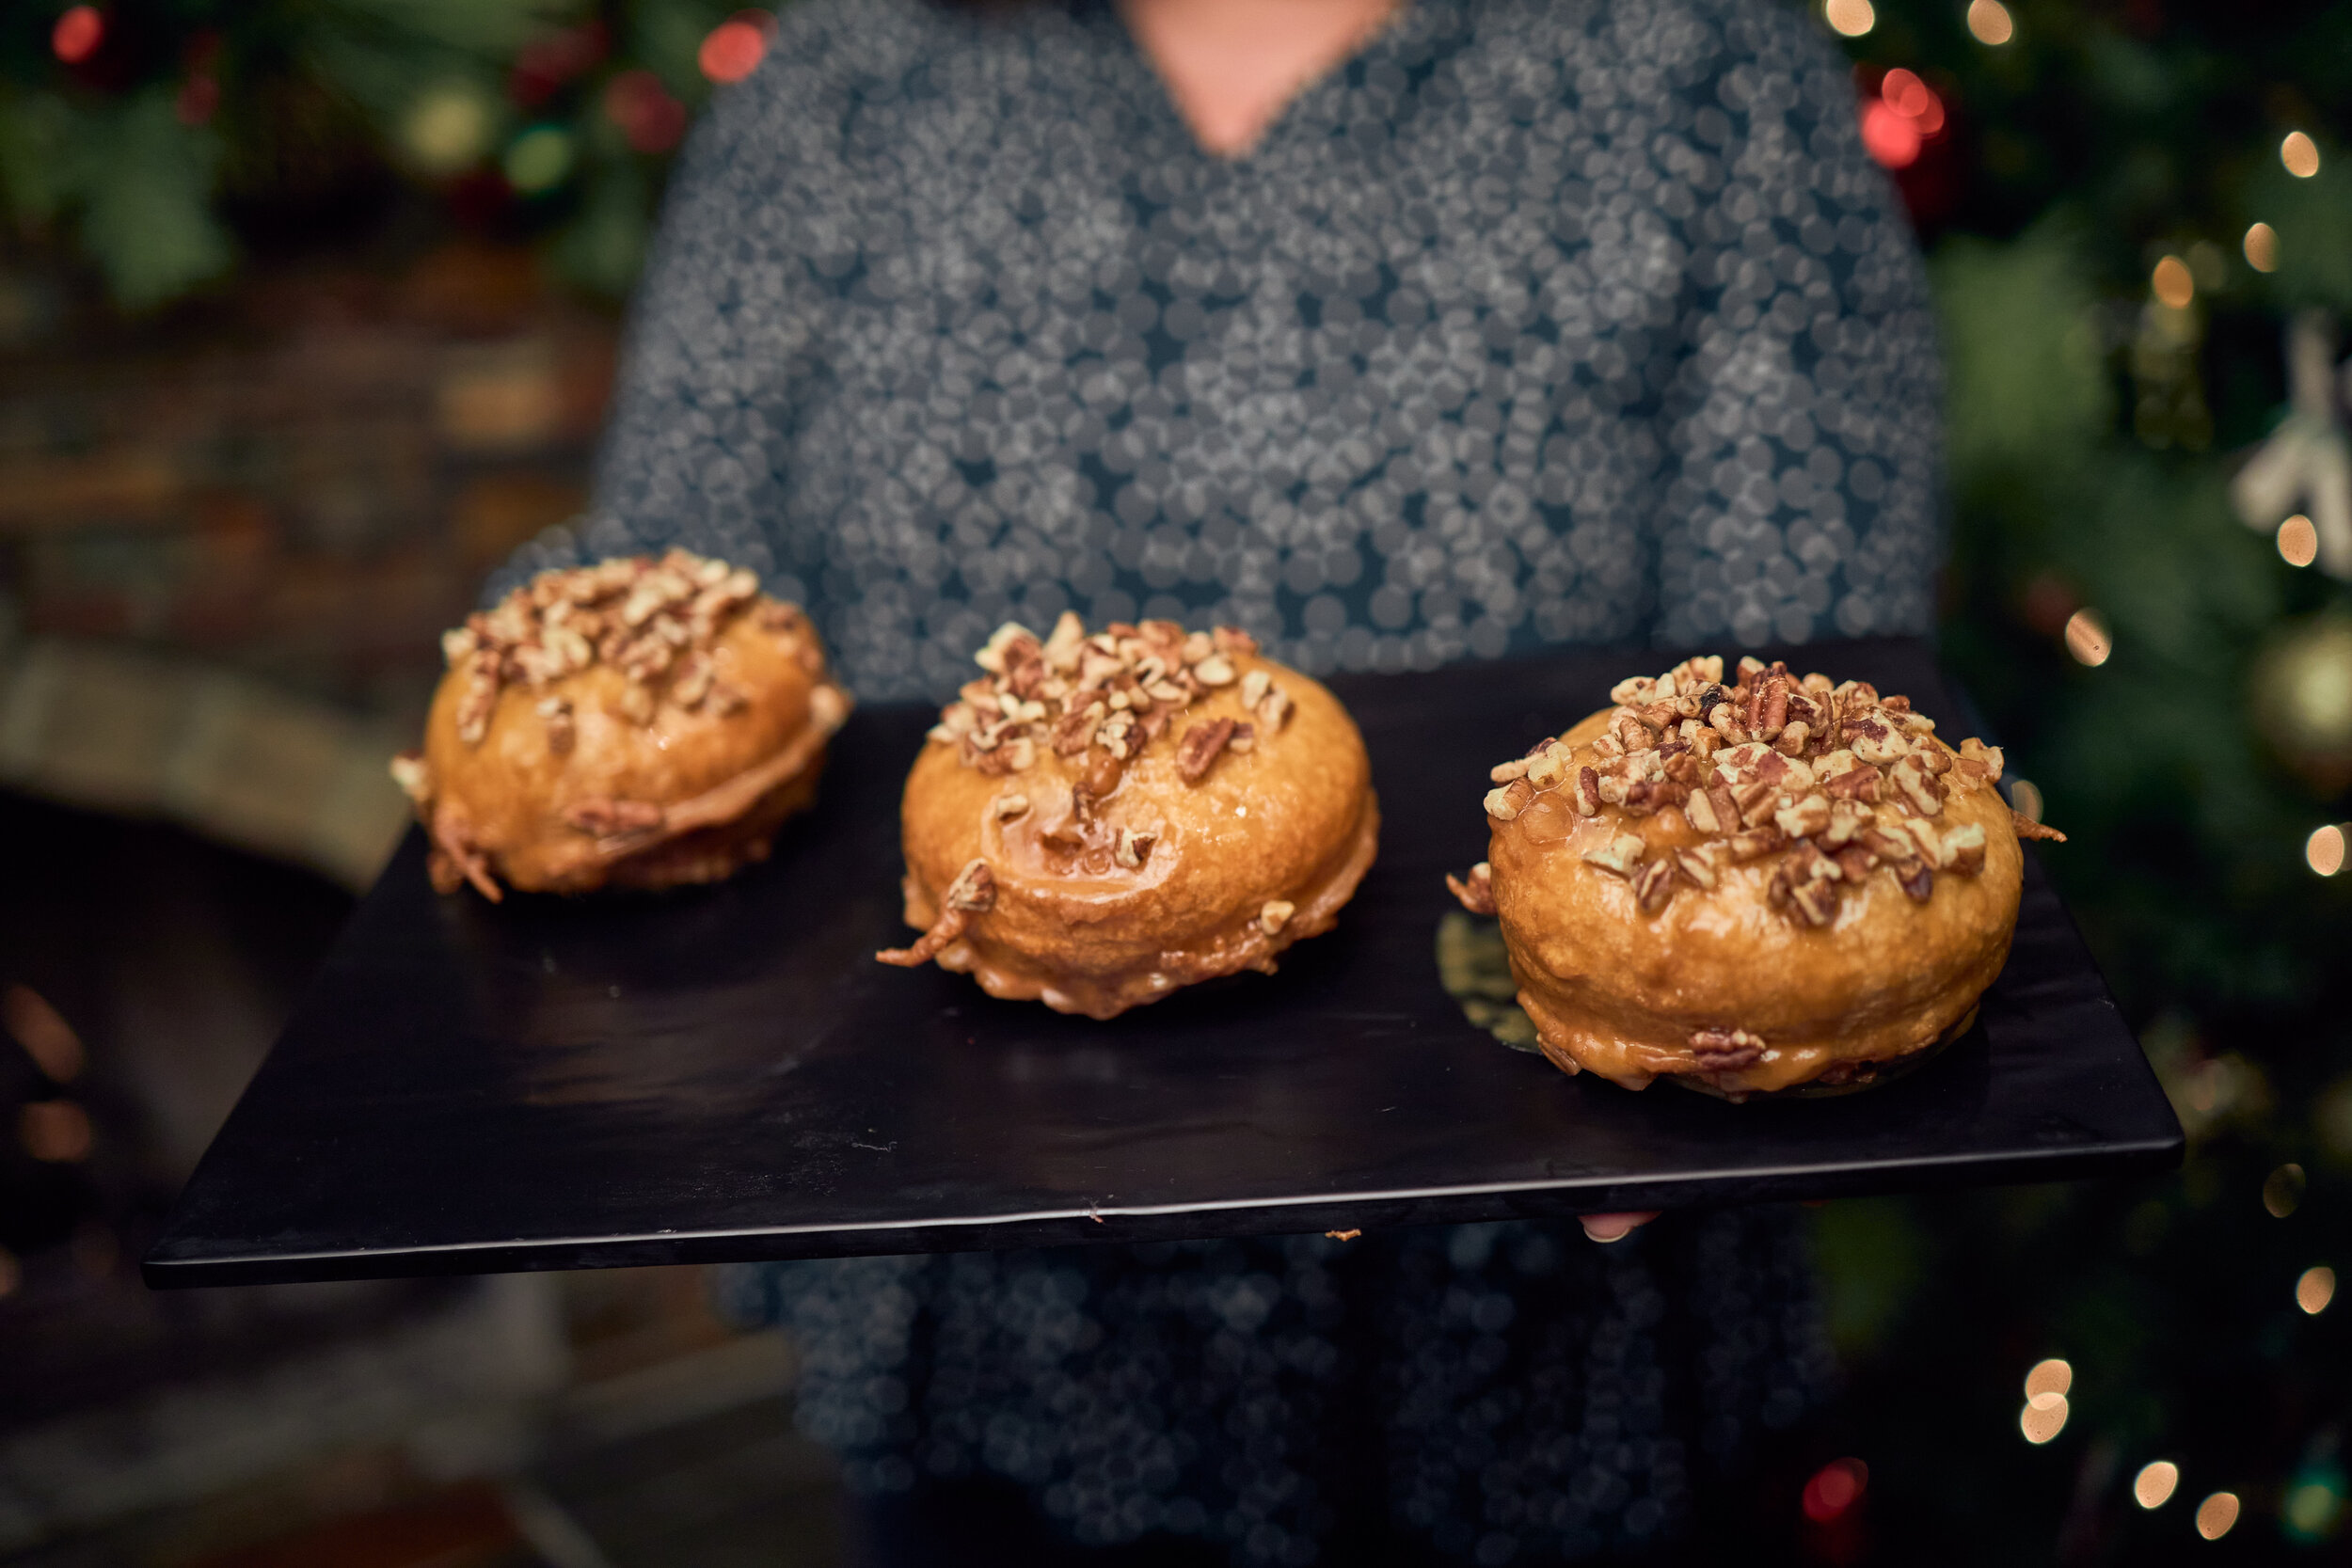 Comet’s Cinnamon Bun with a Maple Glaze and Candied Pecans